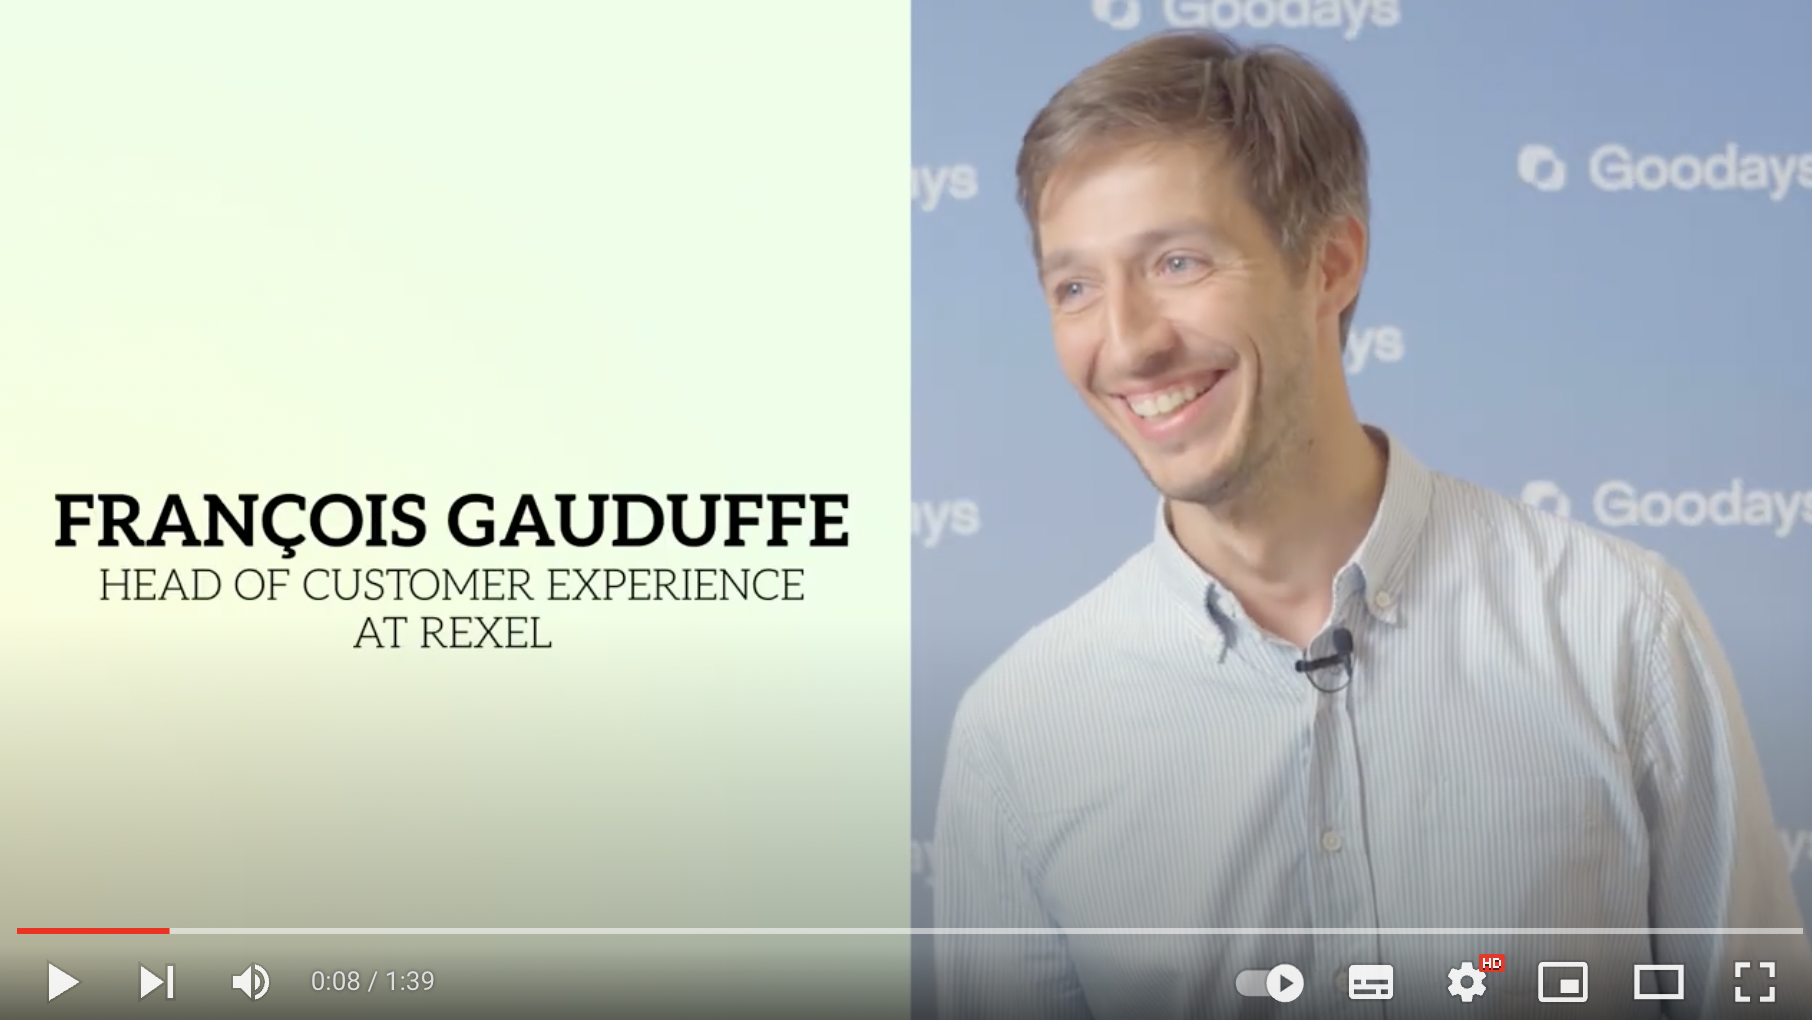 Francois Gauduffe head of CX at Rexel discusses working with Goodays at Superlocal